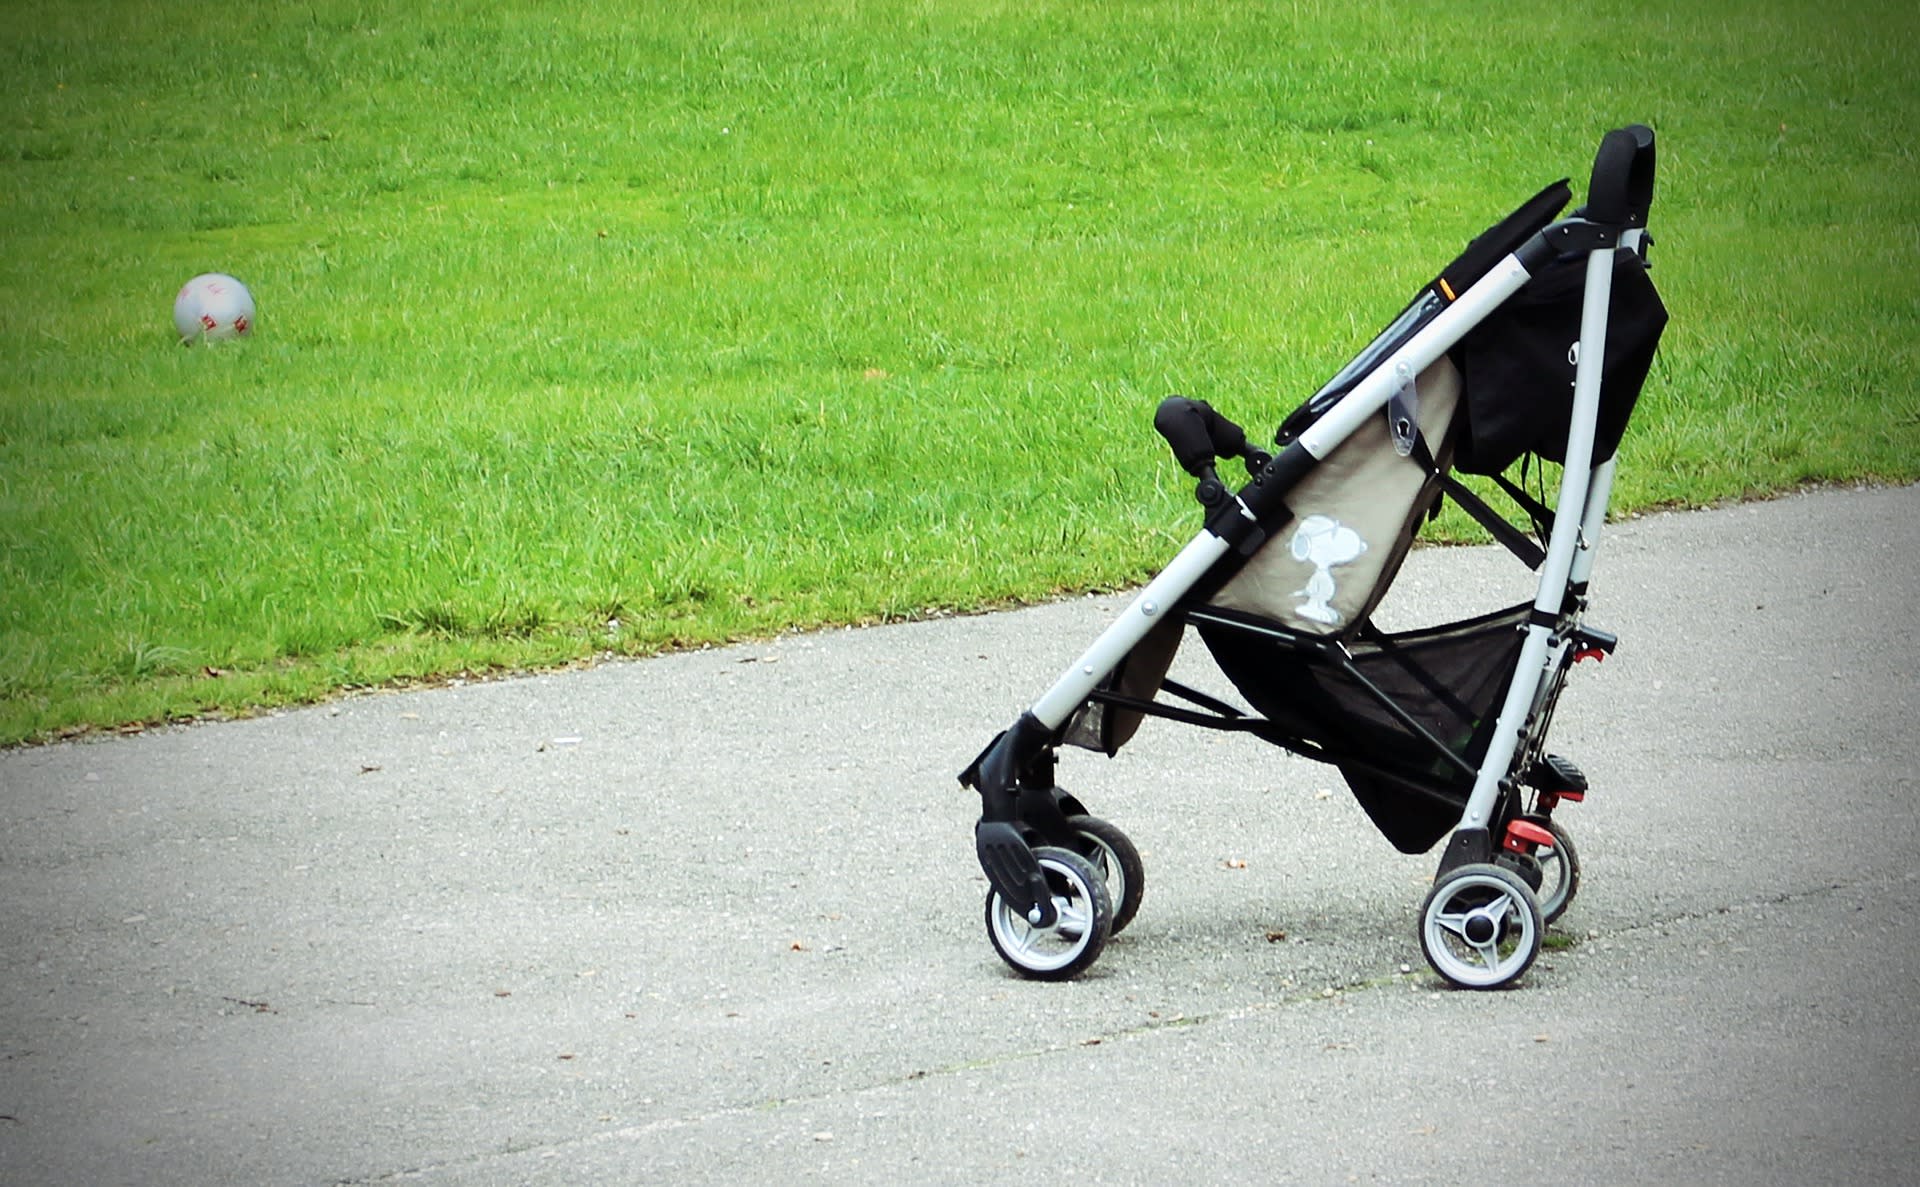 A baby stroller in a park